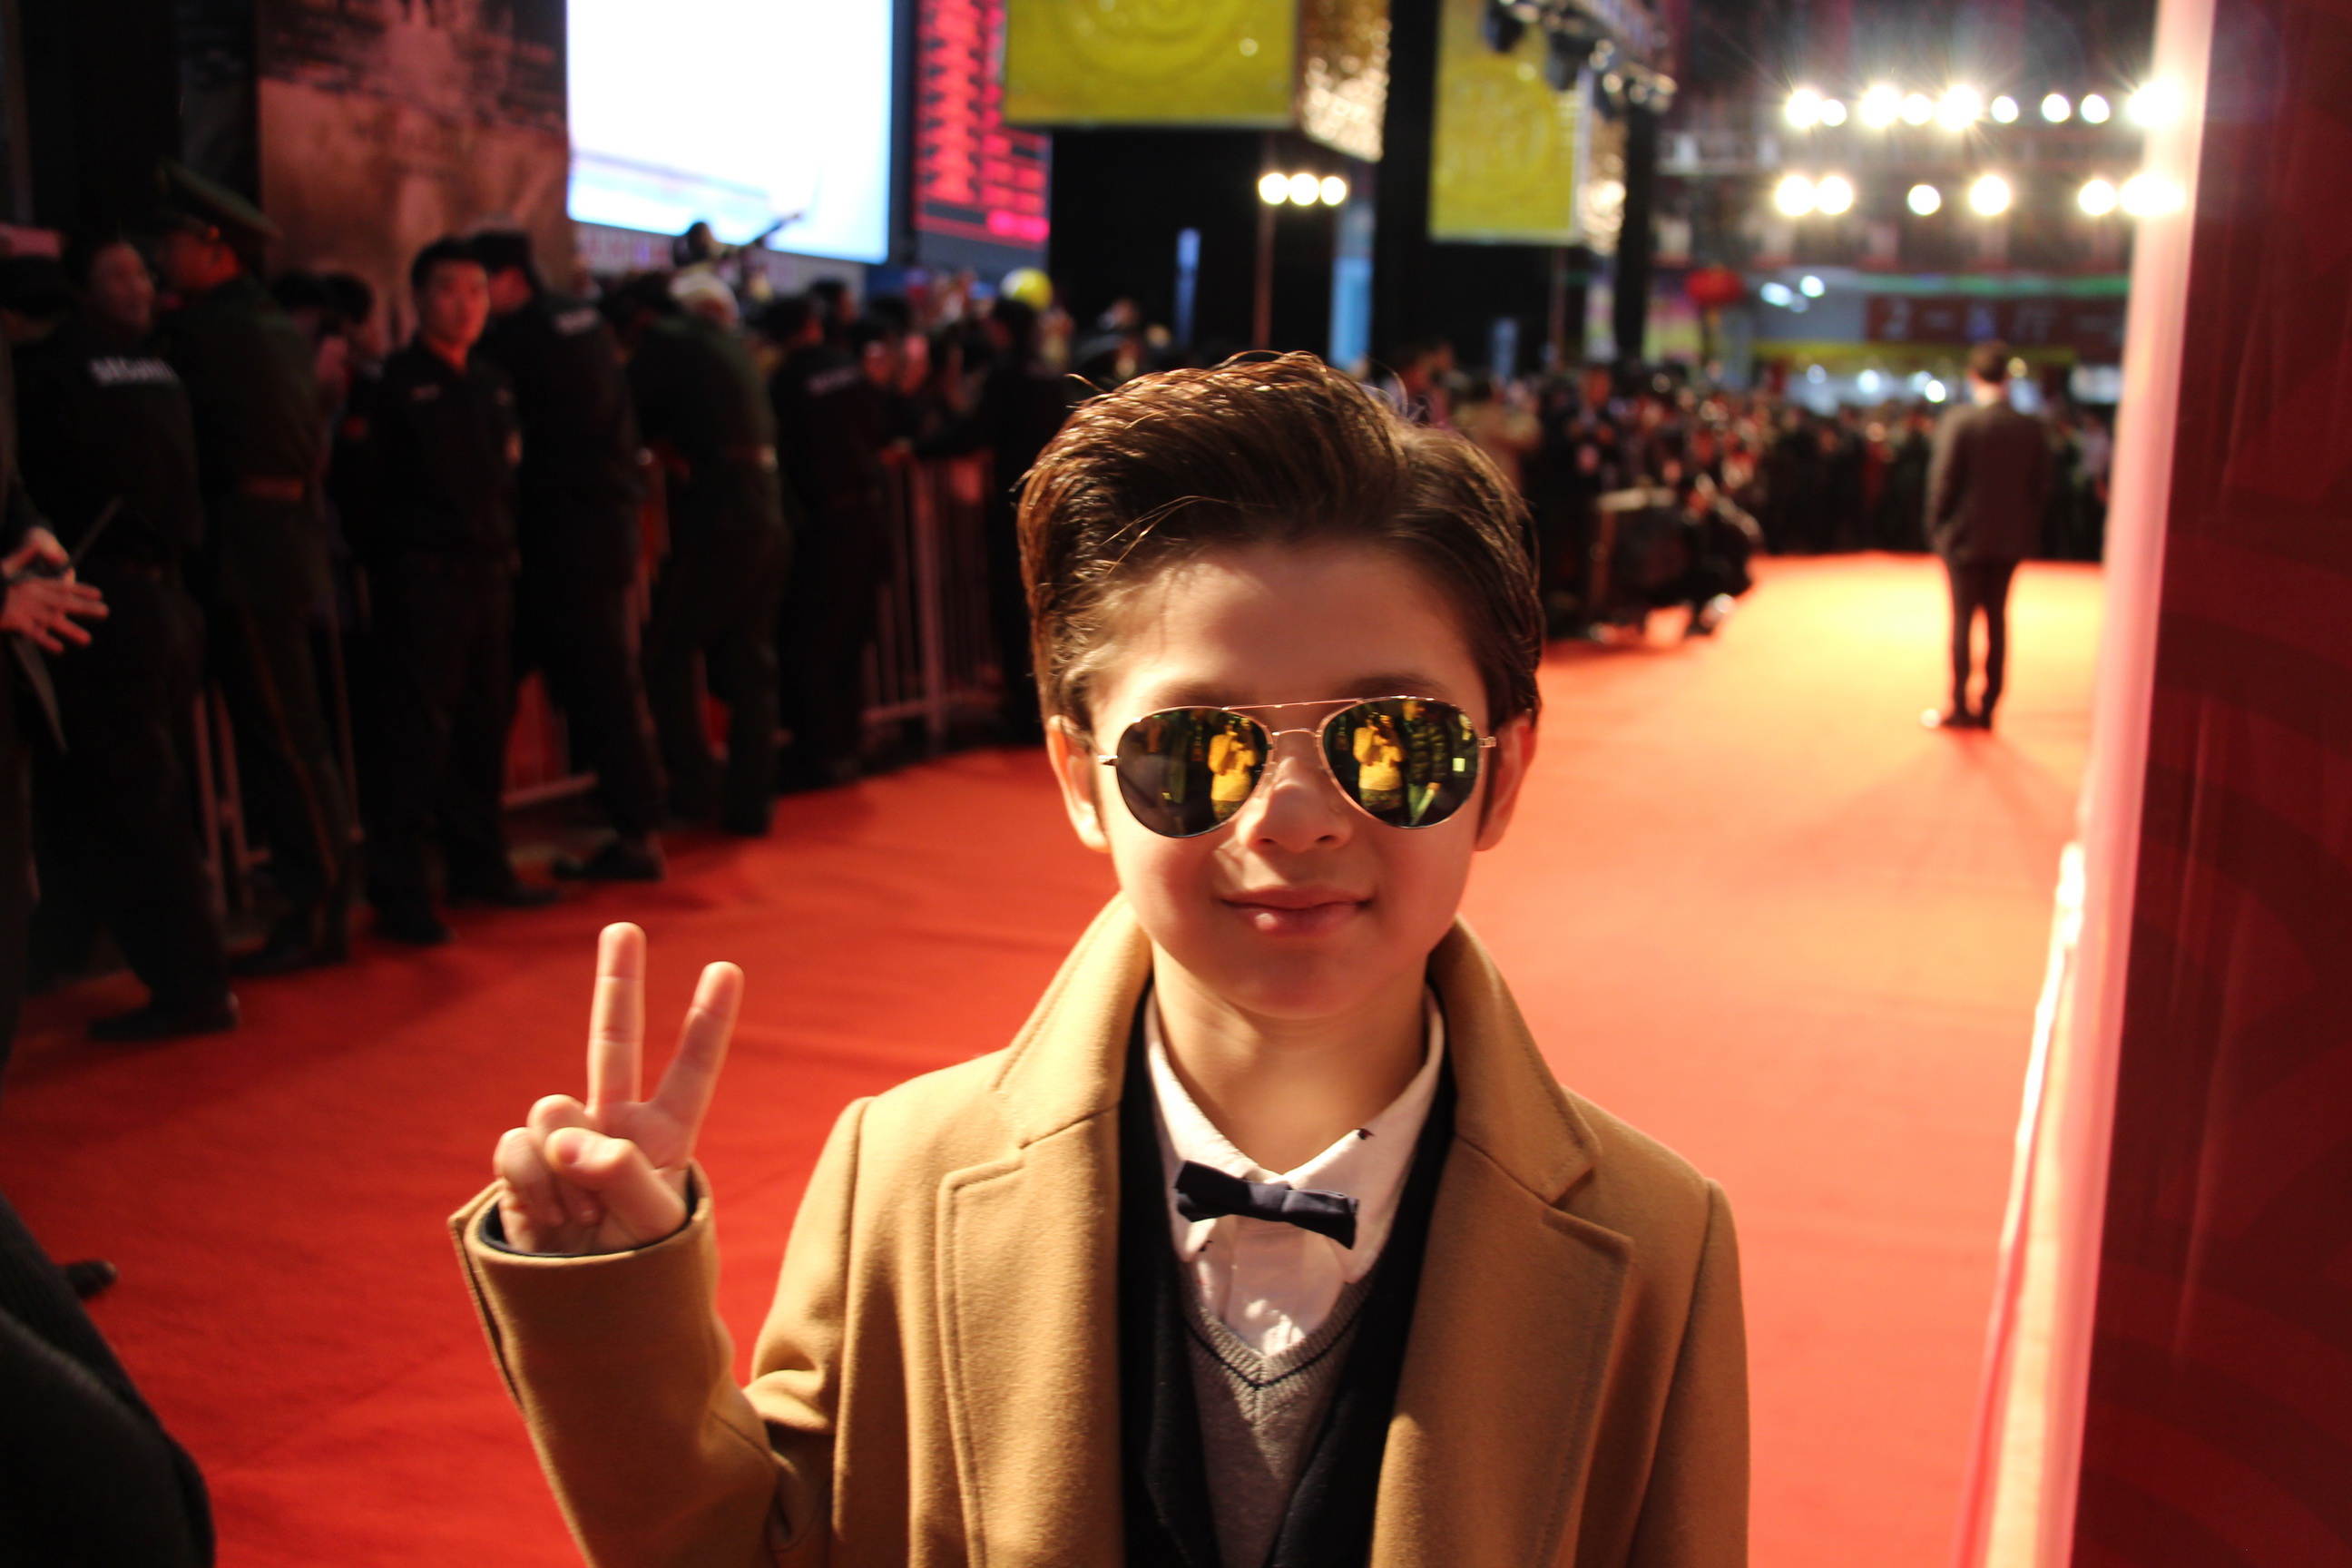 Jozef Waite just before being introduced to the press in Beijing, China for the Dragon Blade premiere. February 2015.